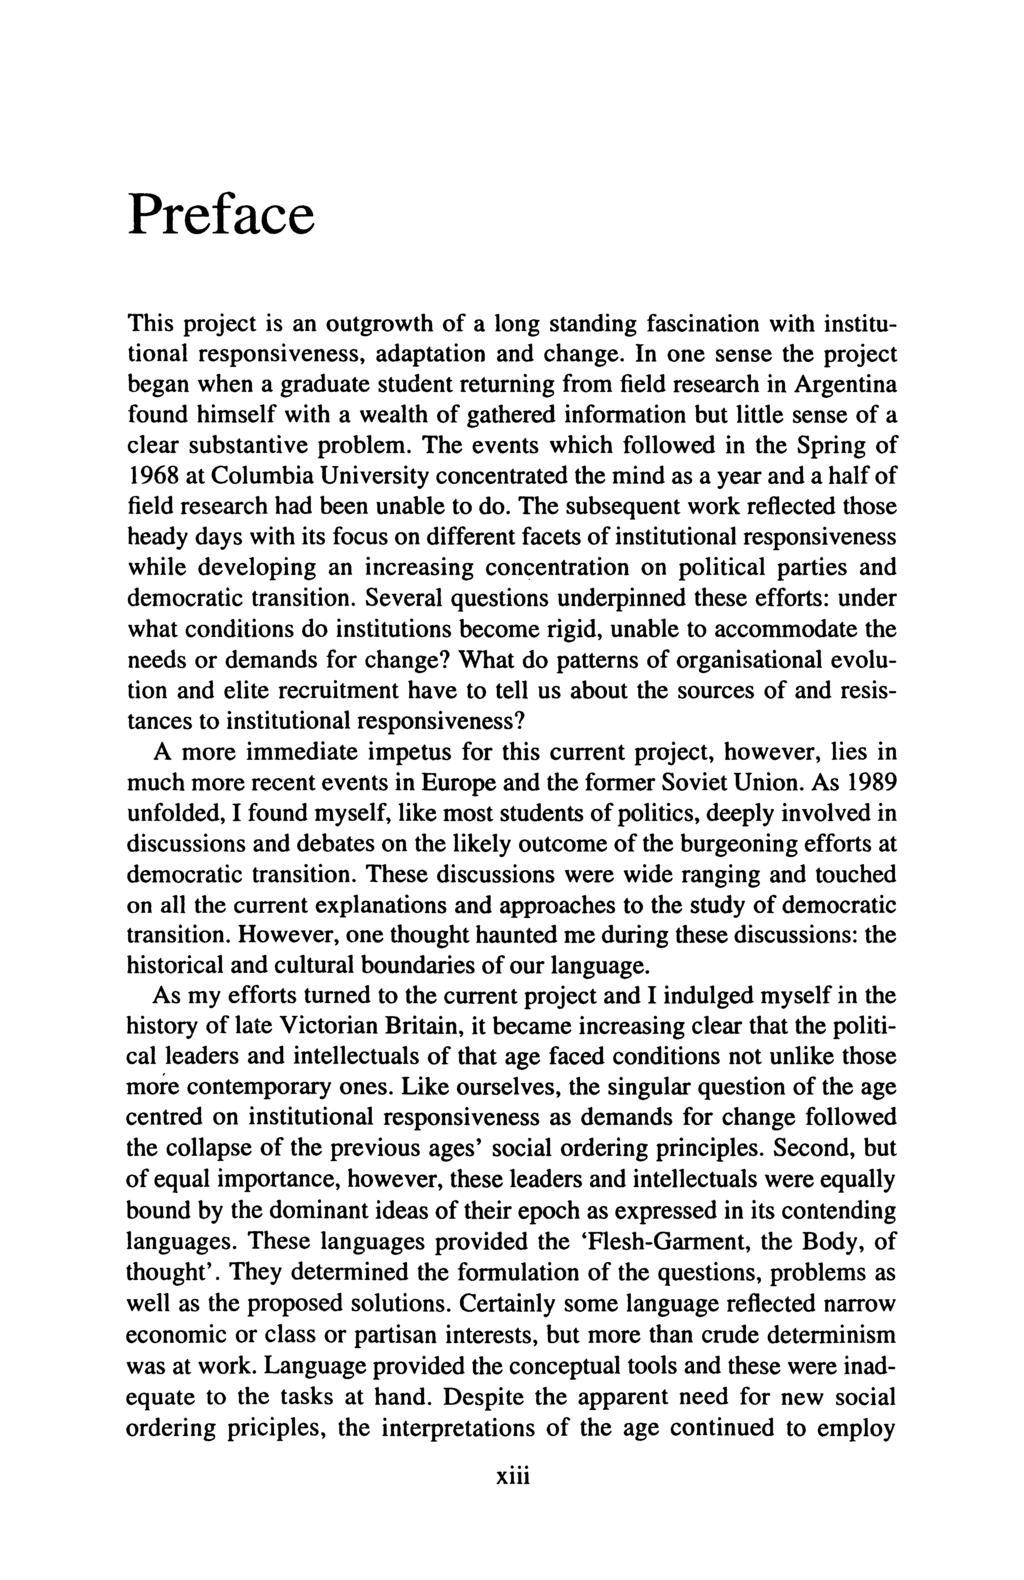 Preface This project is an outgrowth of a long standing fascination with institutional responsiveness, adaptation and change.